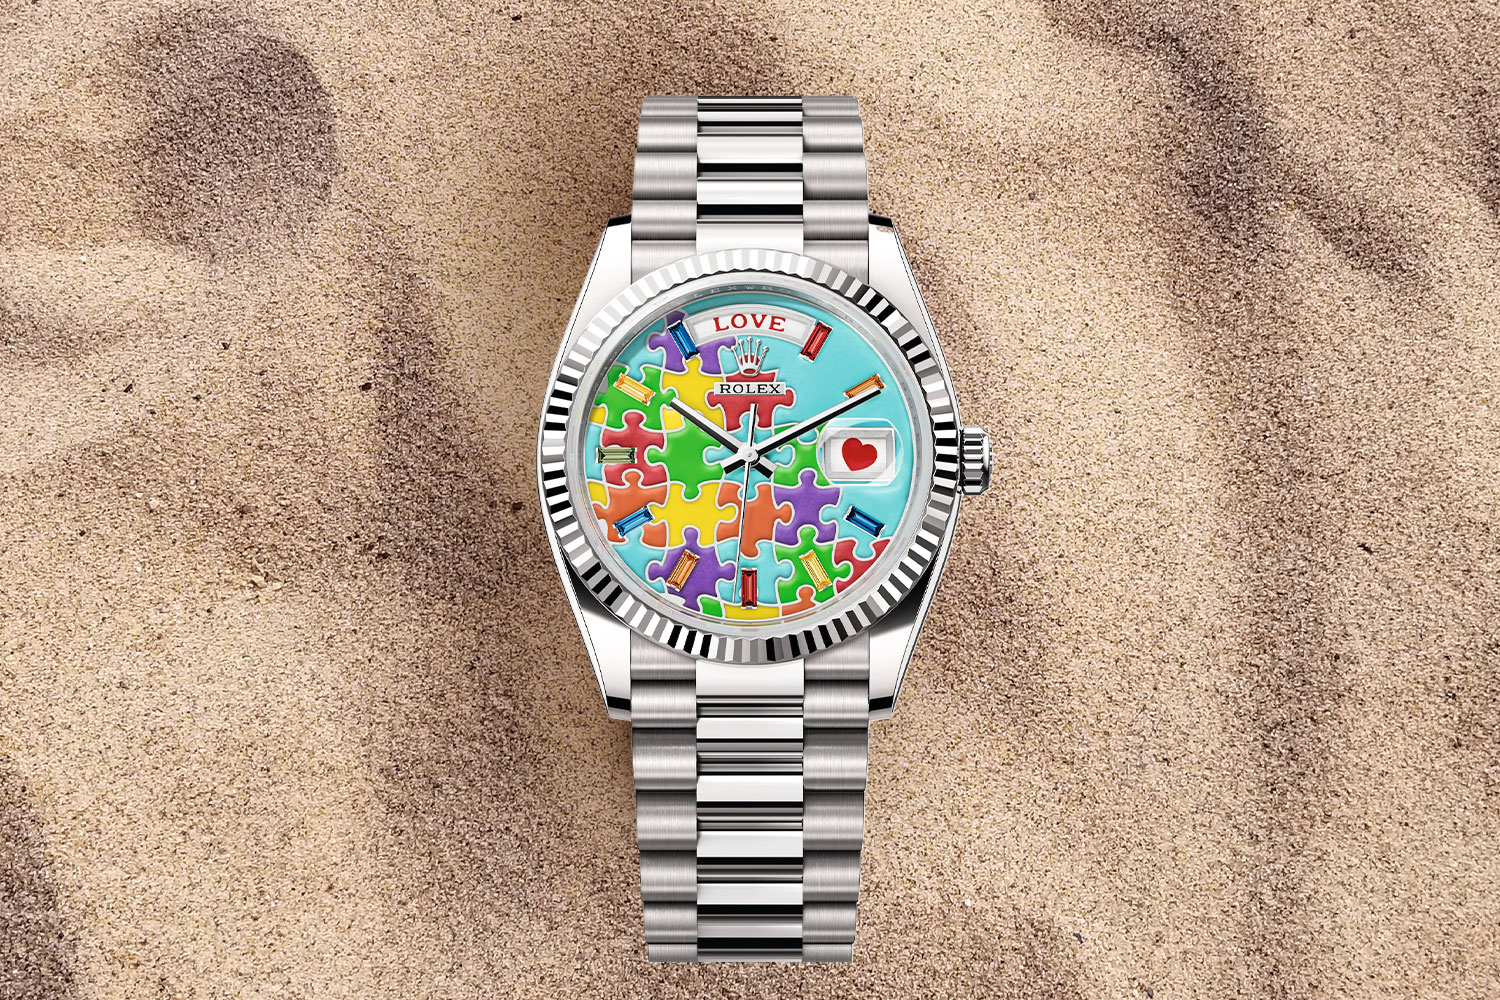 Silver watch with blue face and multi-colored puzzle pieces on it in the sand.